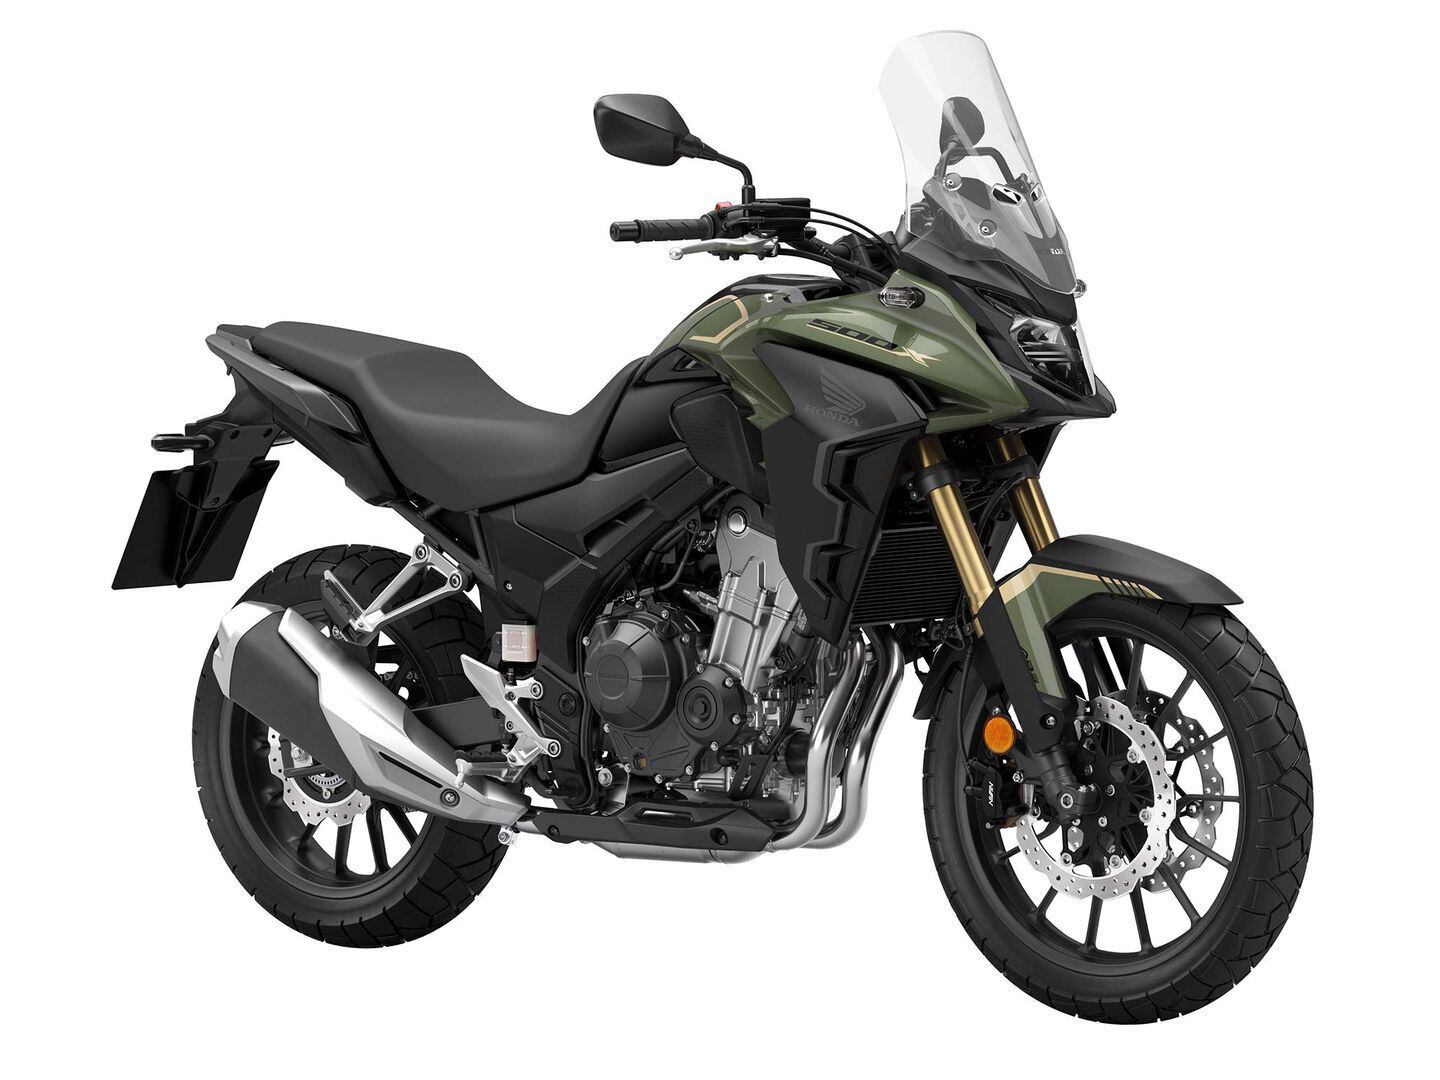 When it comes to entry-level adventure-style motorcycles, the Honda CB500X is an amazing value at $7,199.